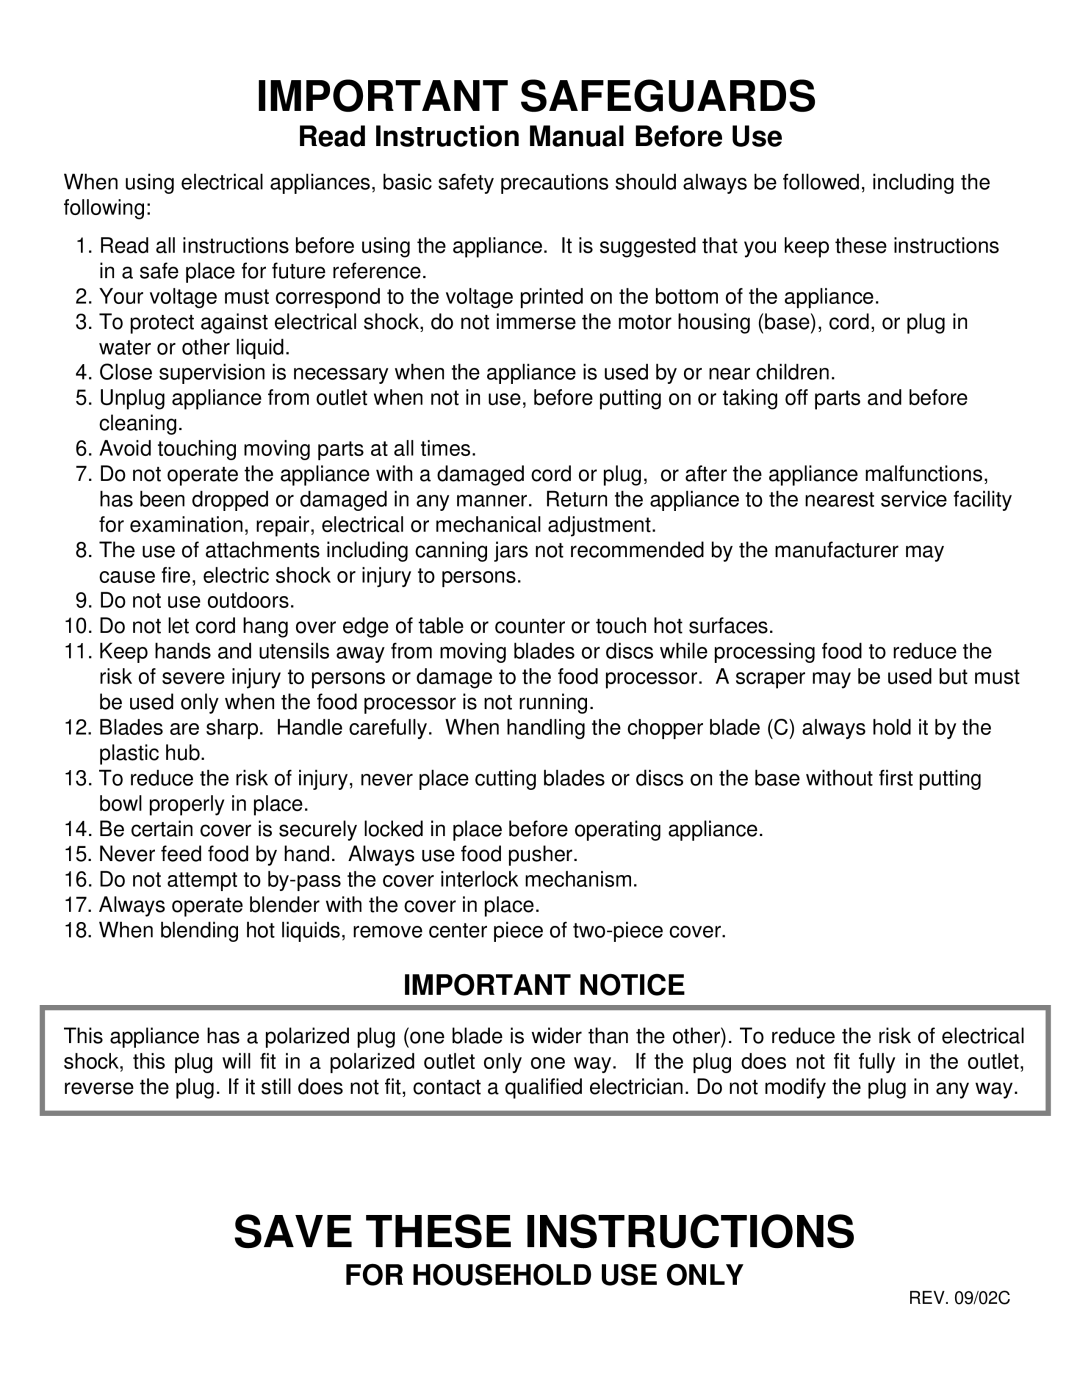 Euro-Pro EKP110 instruction manual Important Notice, For Household Use Only, Save These Instructions, Important Safeguards 